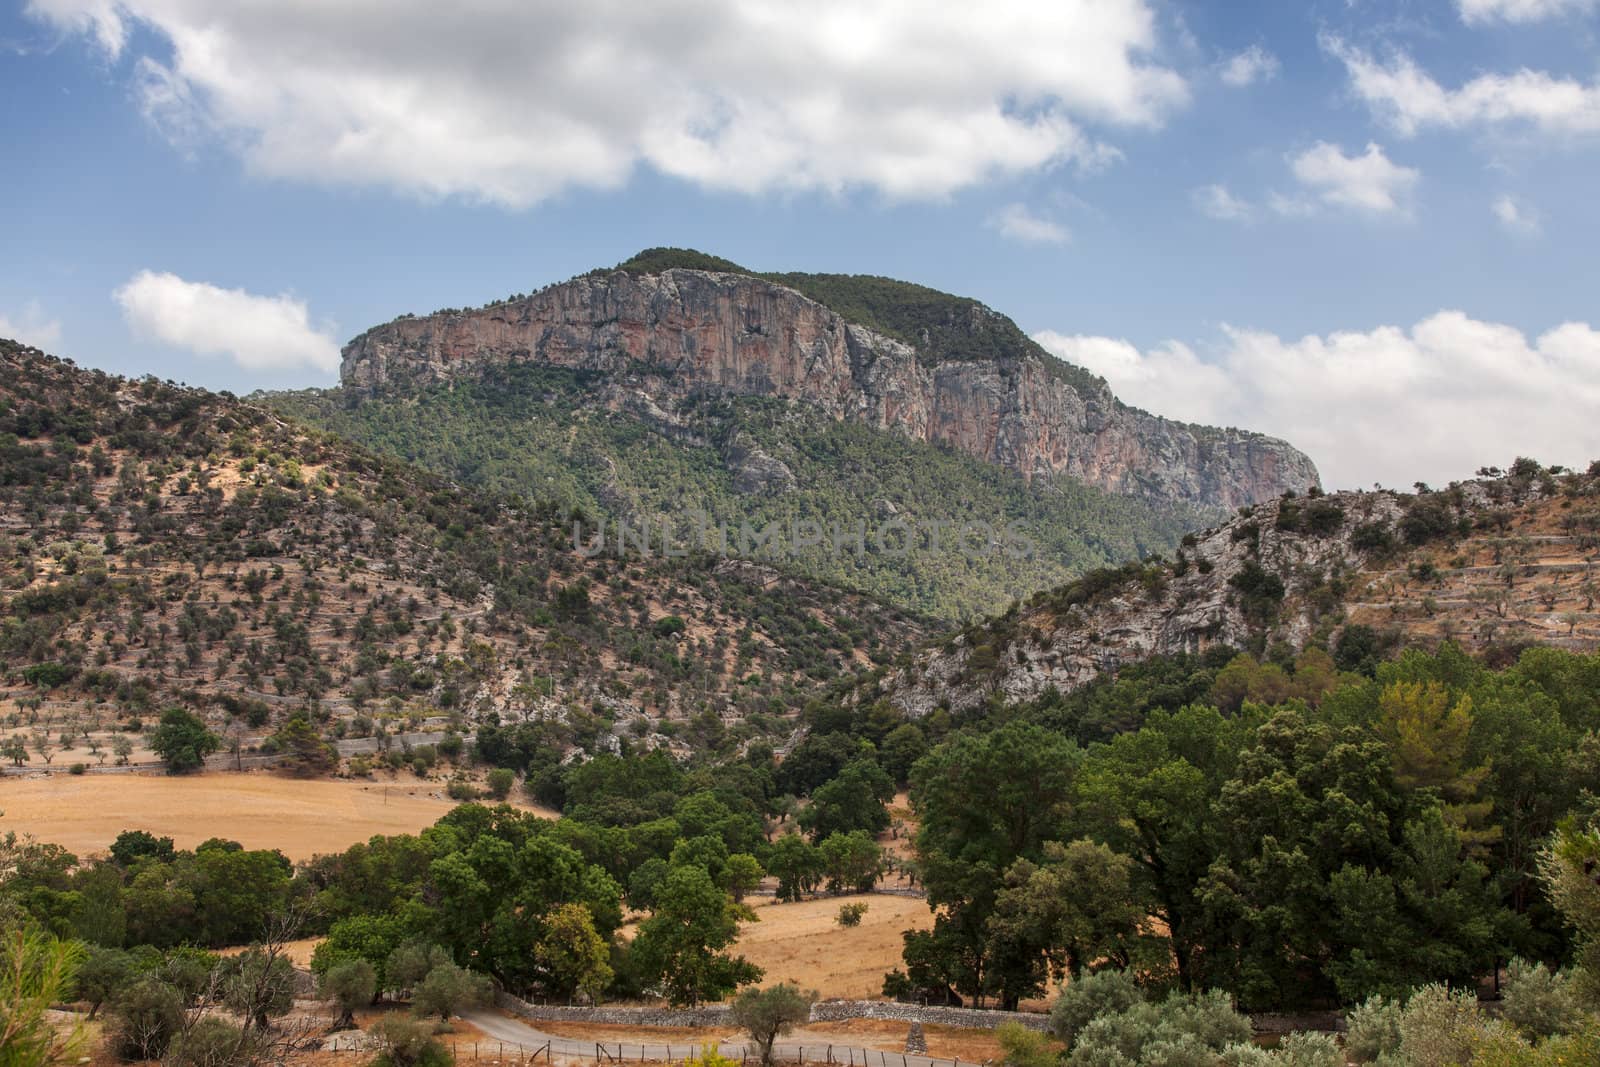 Image of a mediteraneean vegetation in front of the mountain Puig de s’Alcadena near the Alaro town in Mallorca in Balearic Islands, Spain.